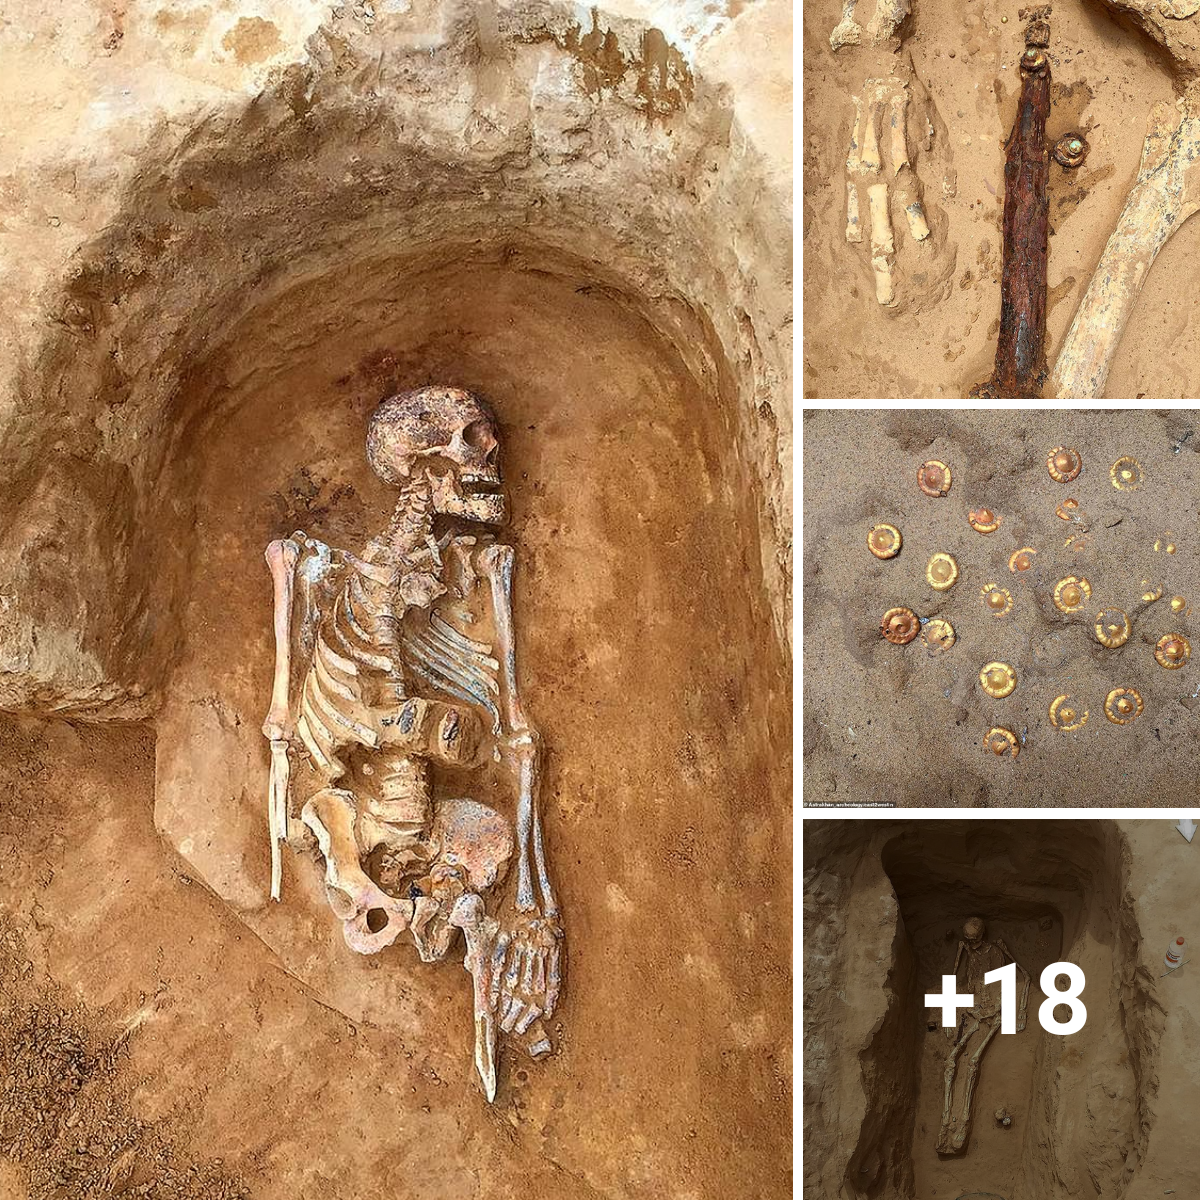 By the rotting body, the man found an old, dried skeleton with a large amount of gold.